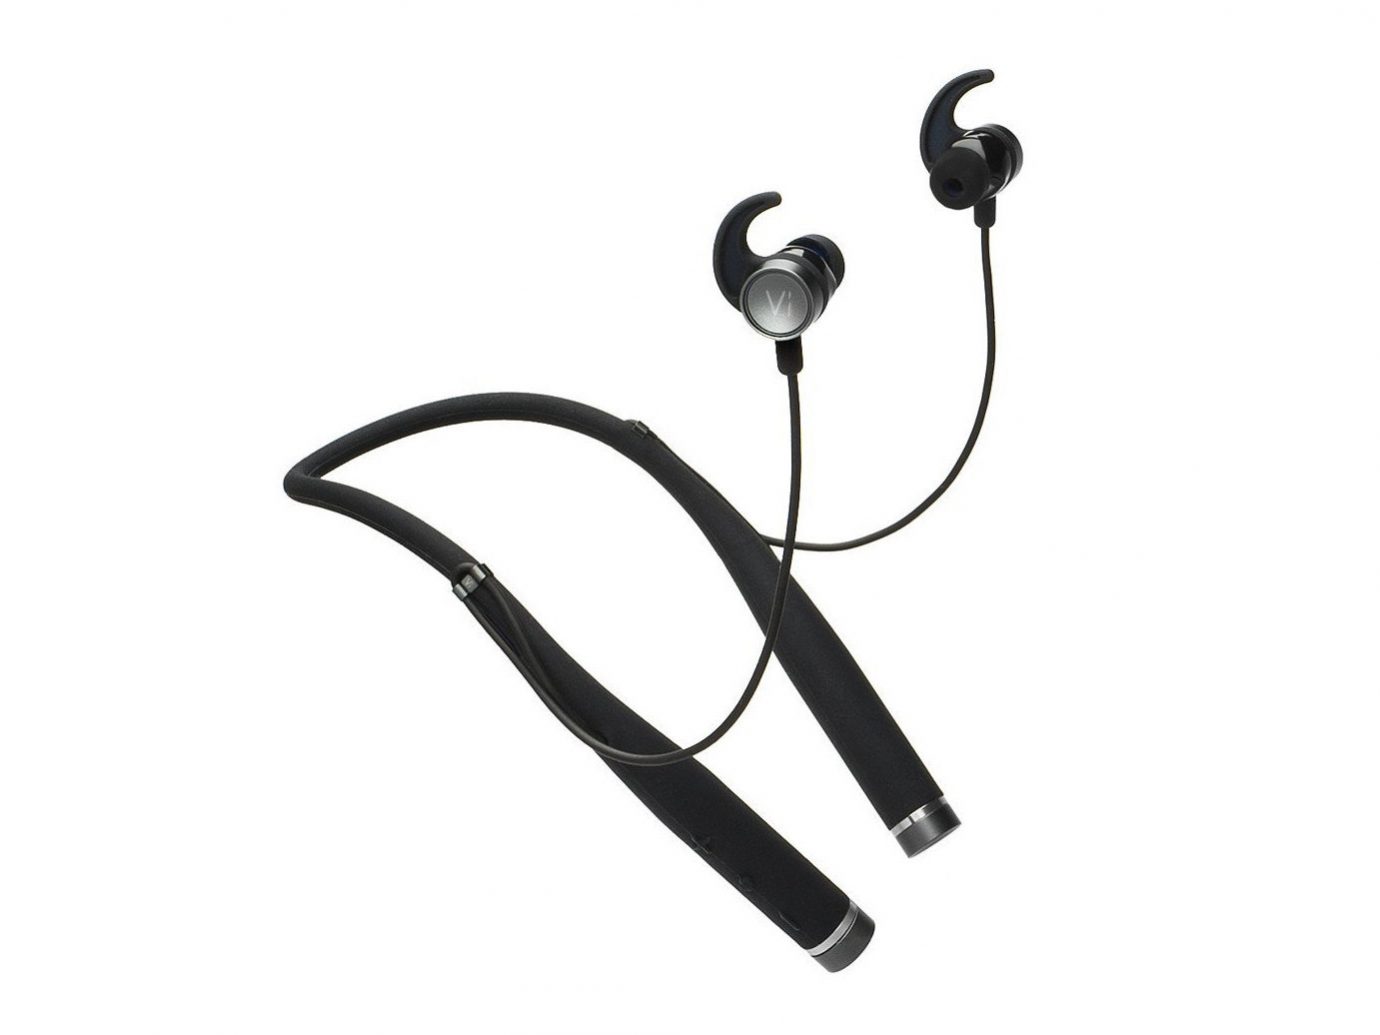 Travel Tips technology audio equipment headphones audio headset product product design body jewelry cable